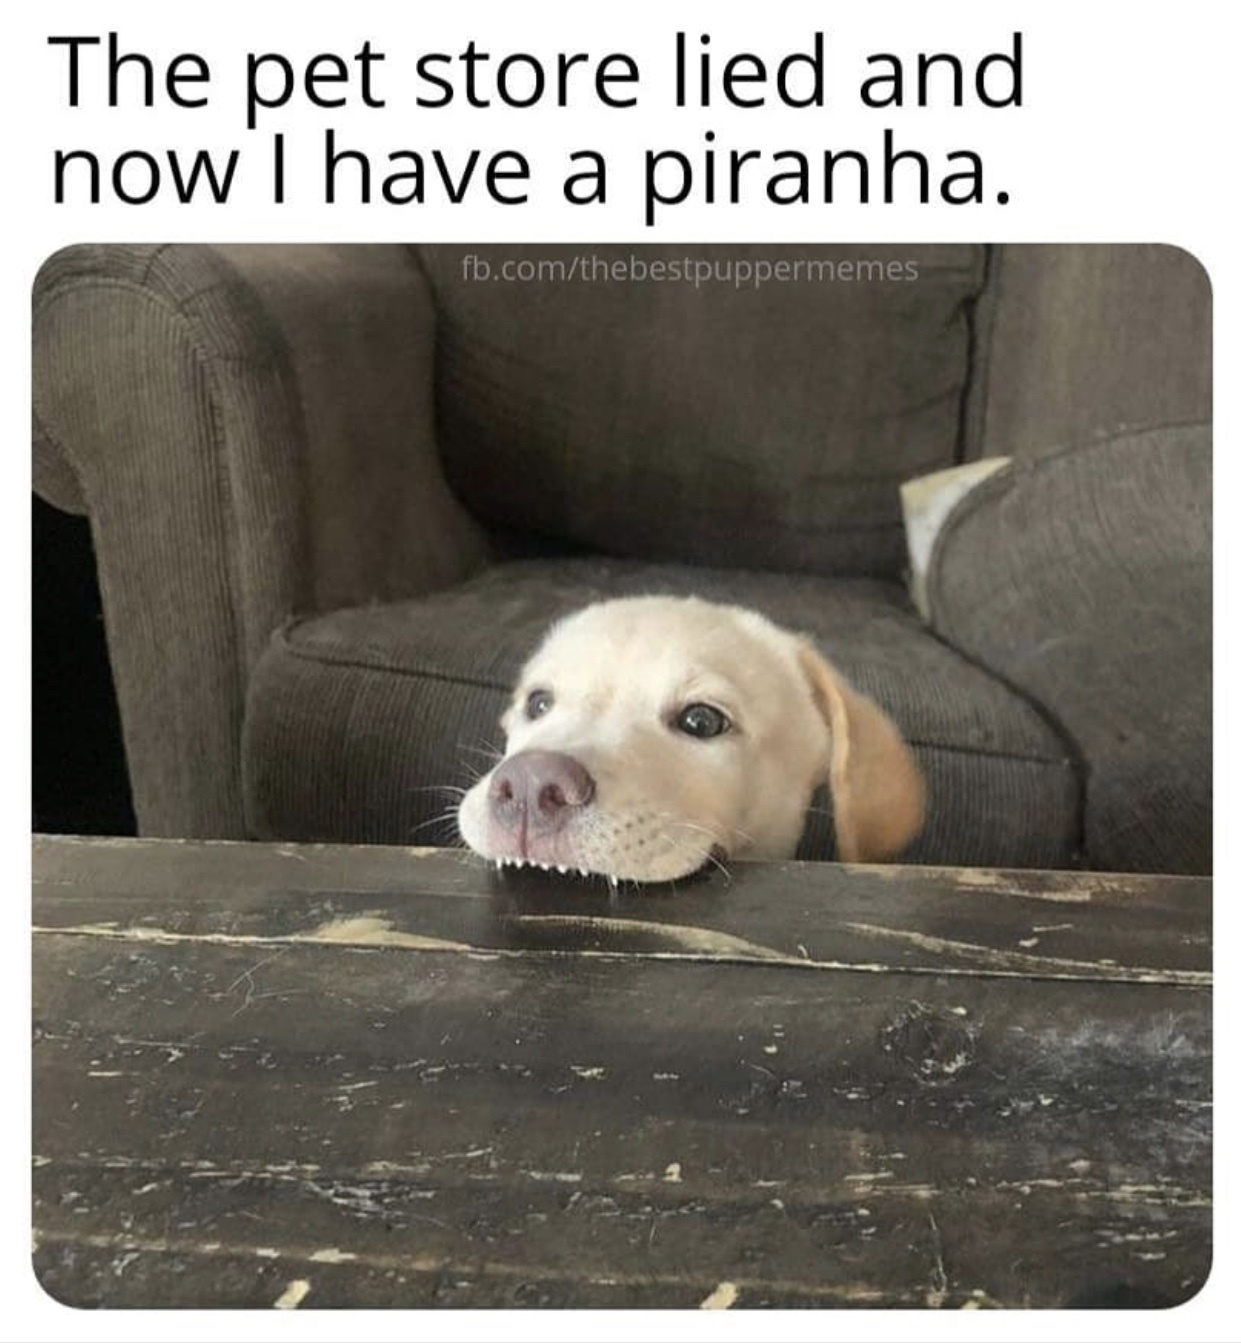 my 3.5 month old piranha - The pet store lied and now I have a piranha. fb.comthebestpuppermemes